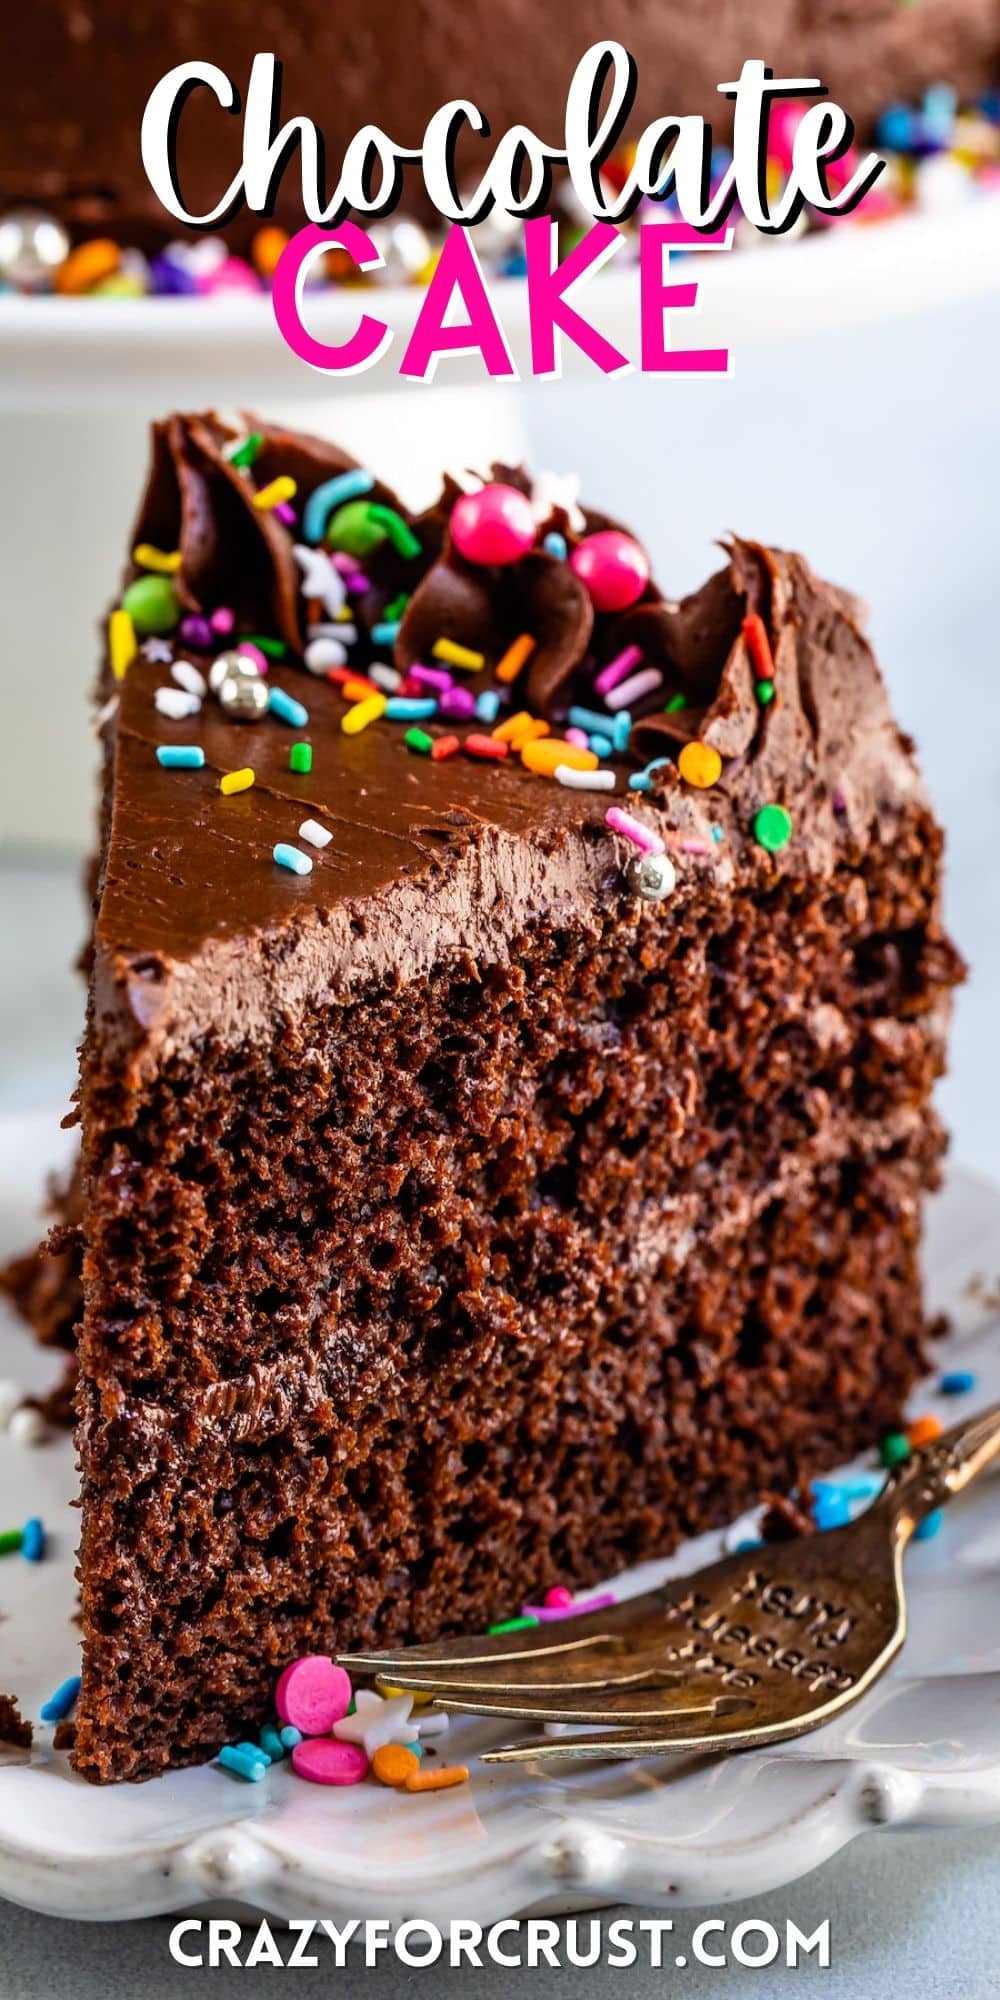 chocolate cake with chocolate frosting and covered in colorful sprinkles with words on the image.